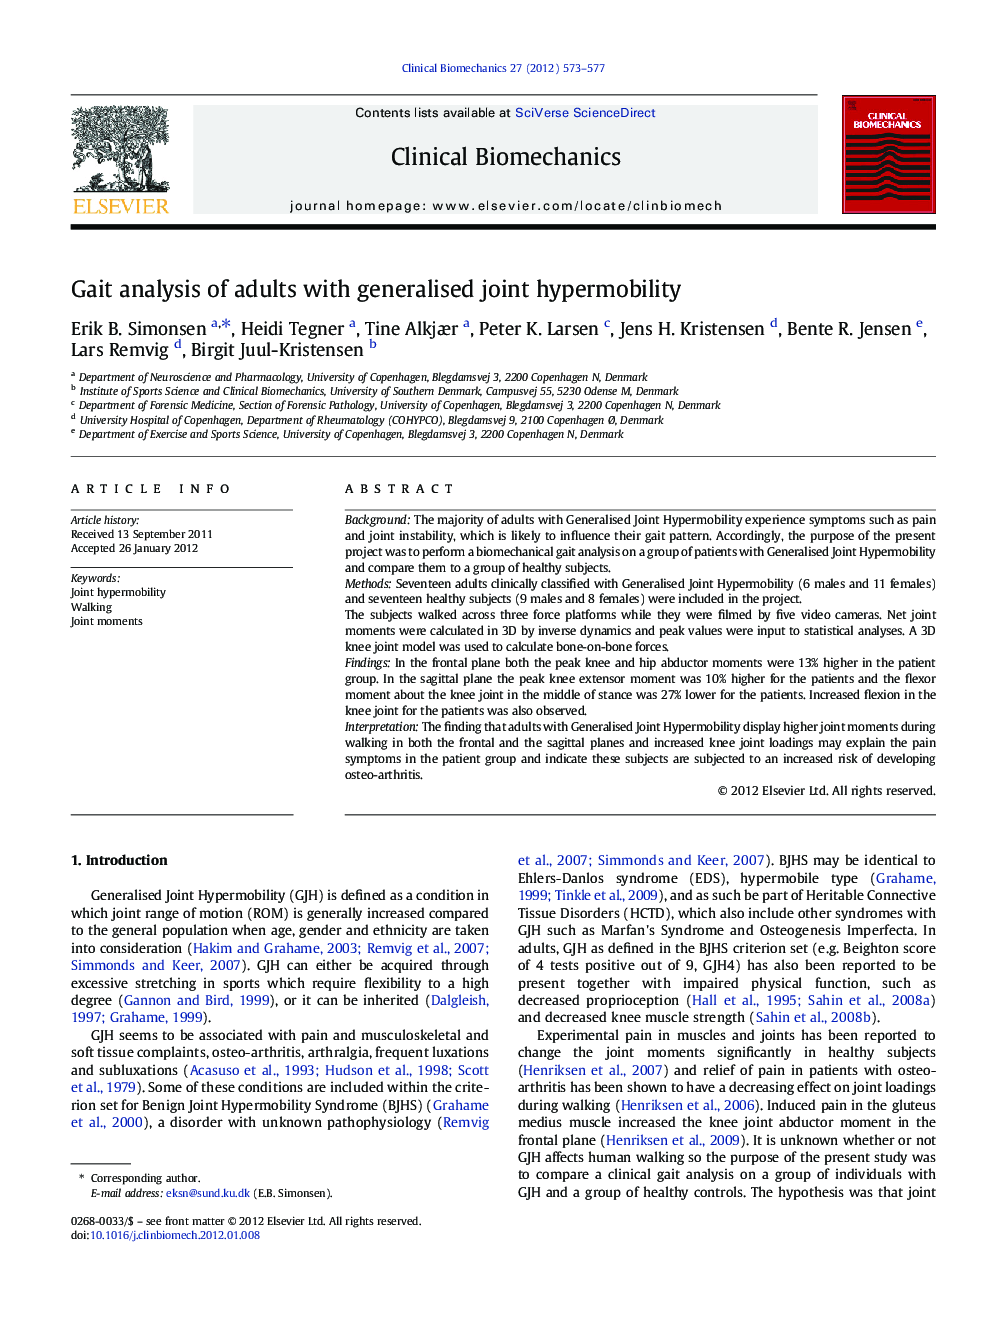 Gait analysis of adults with generalised joint hypermobility